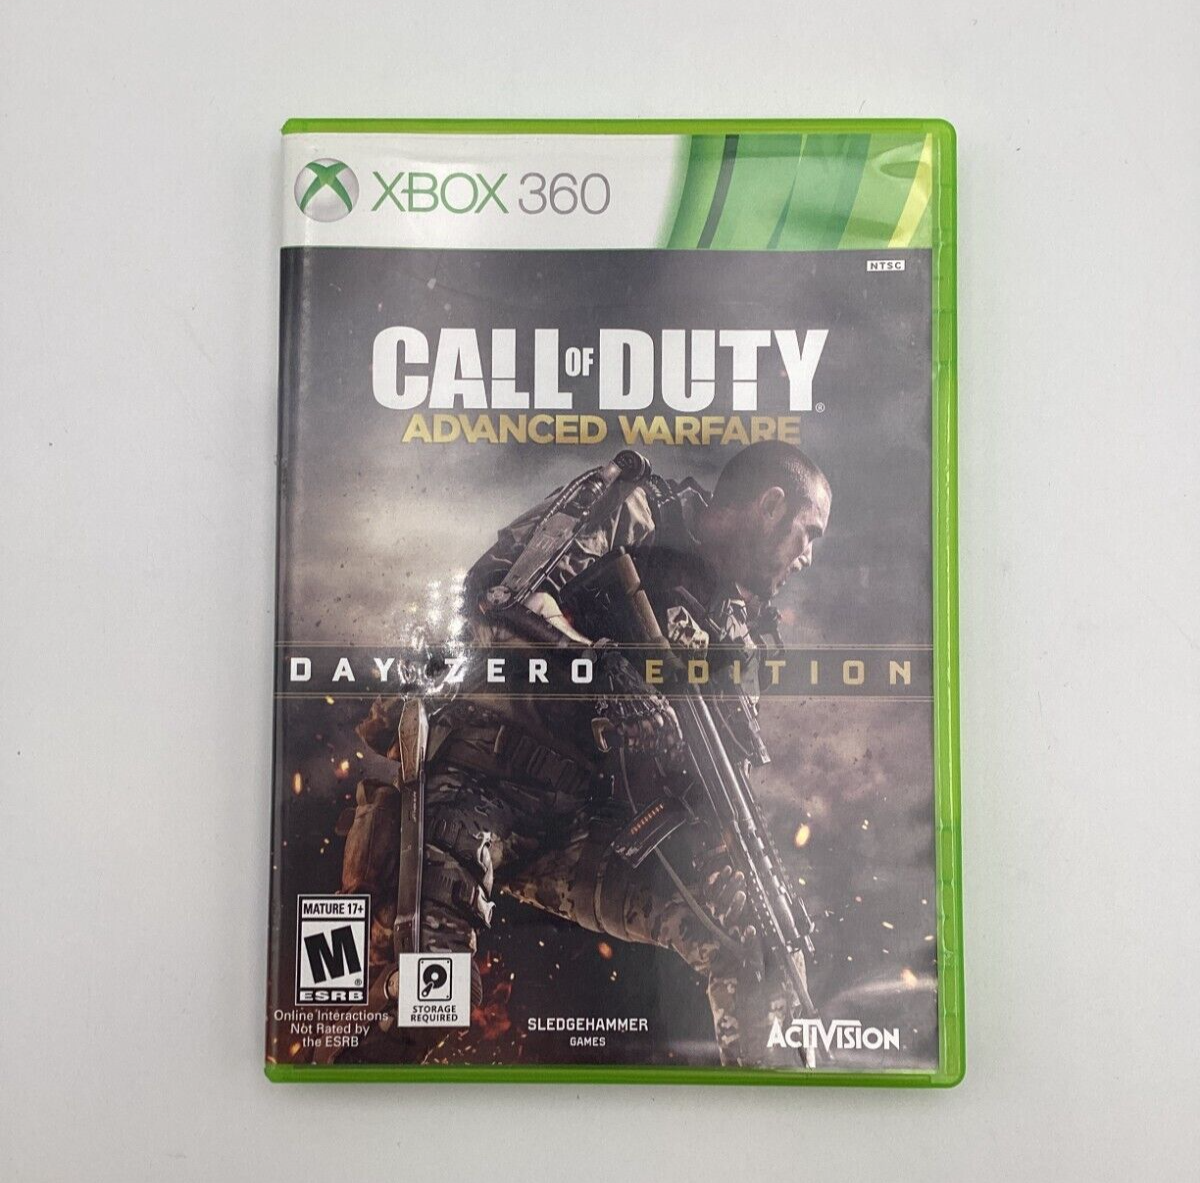 Want to play Call of Duty Advanced Warfare on Day Zero with the celebs?